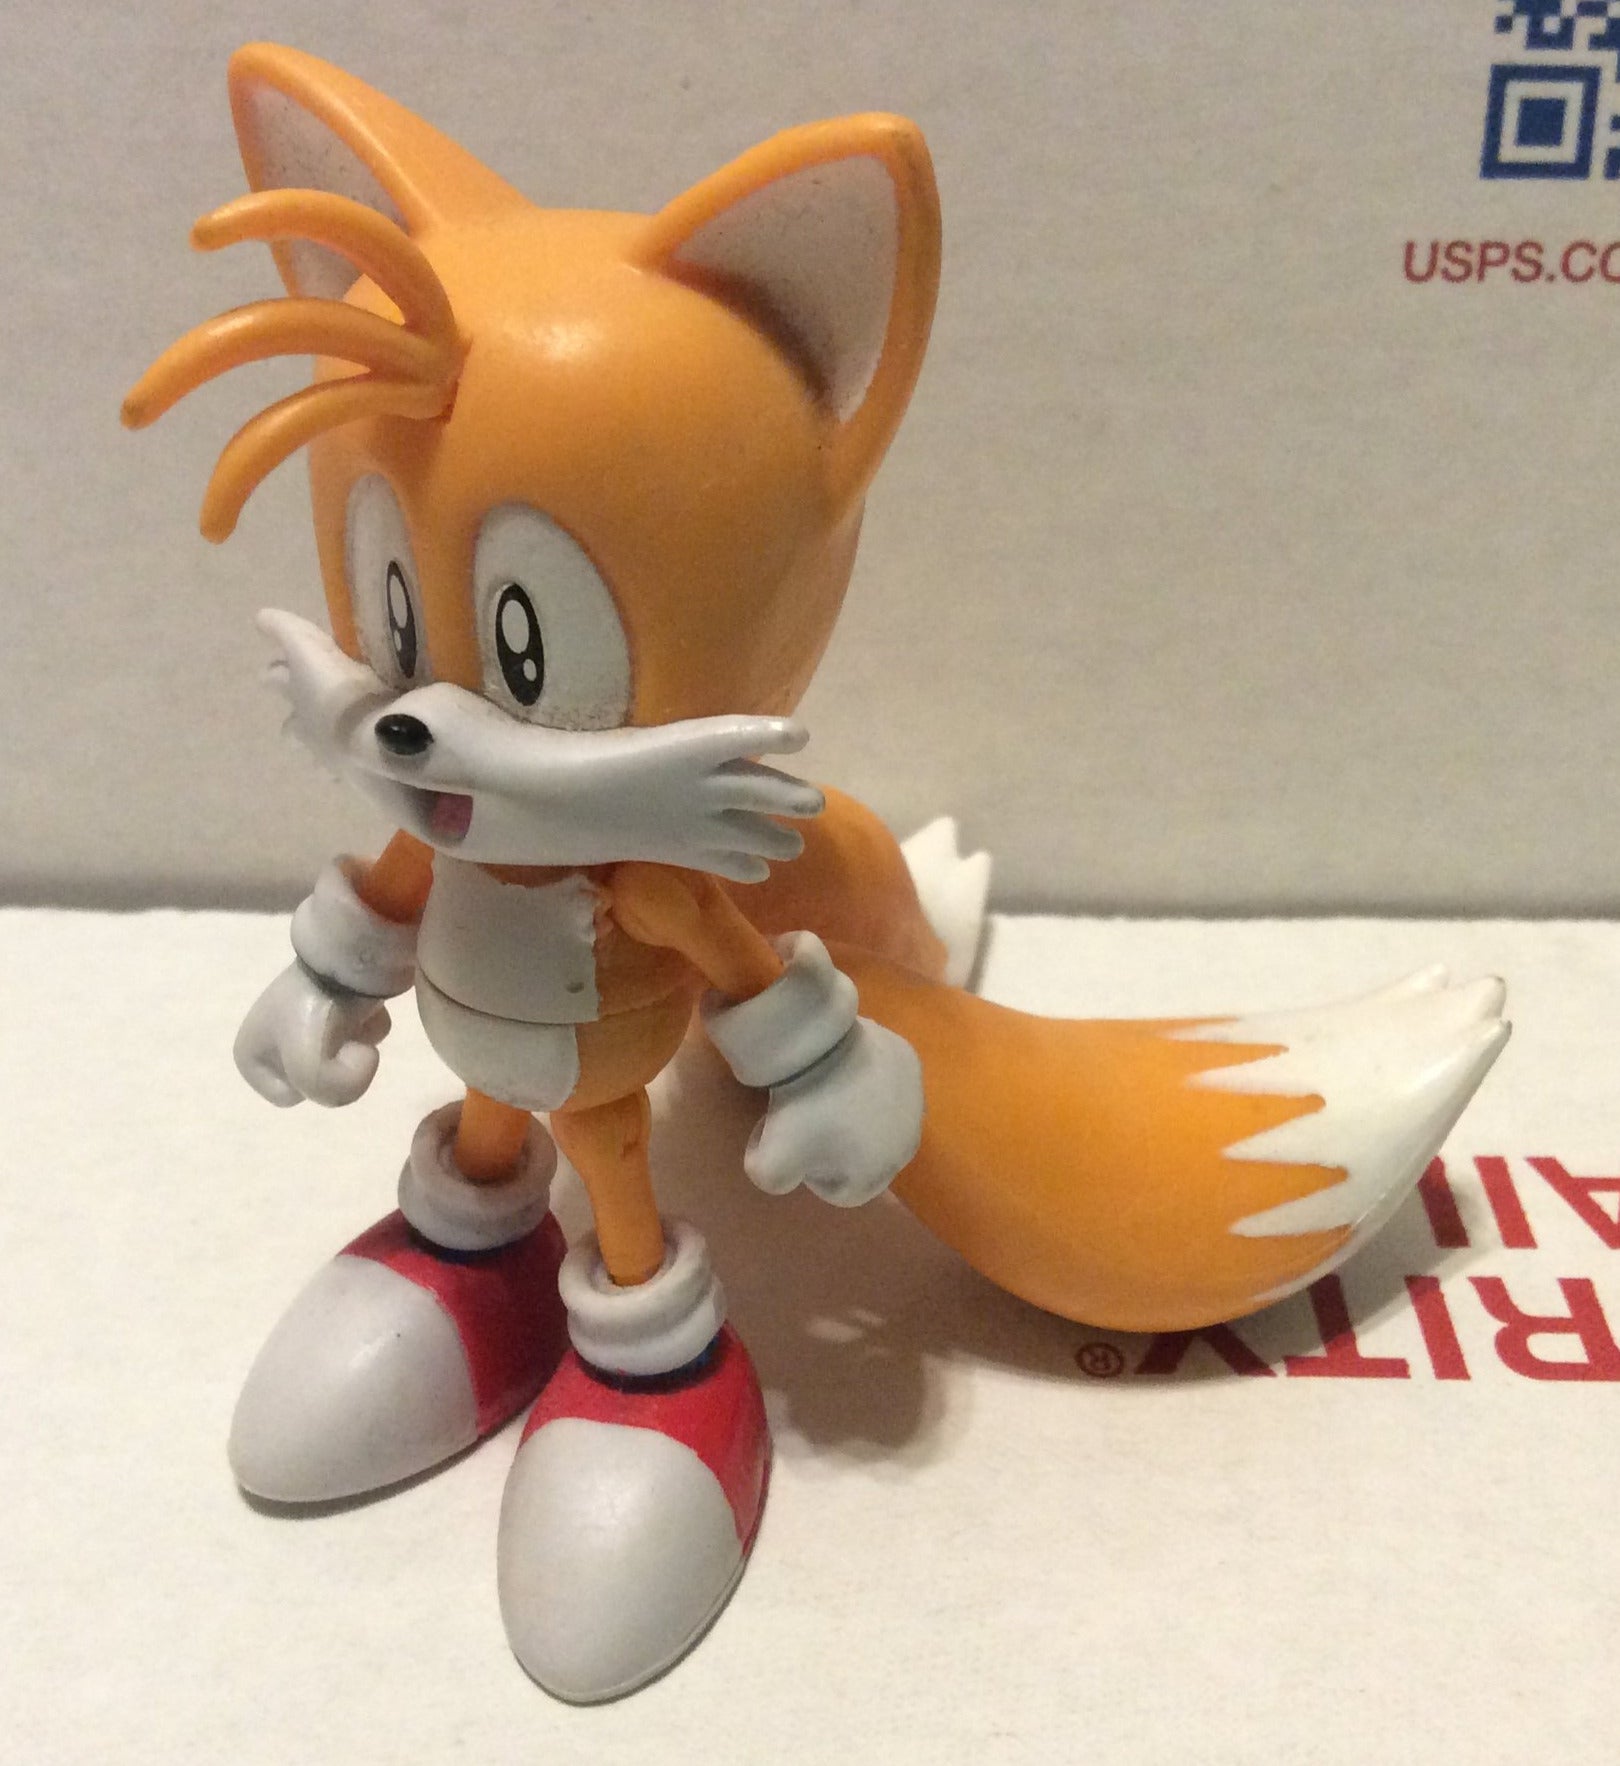 Sonic the Hedgehog 2.5 Classic Tails Action Figure